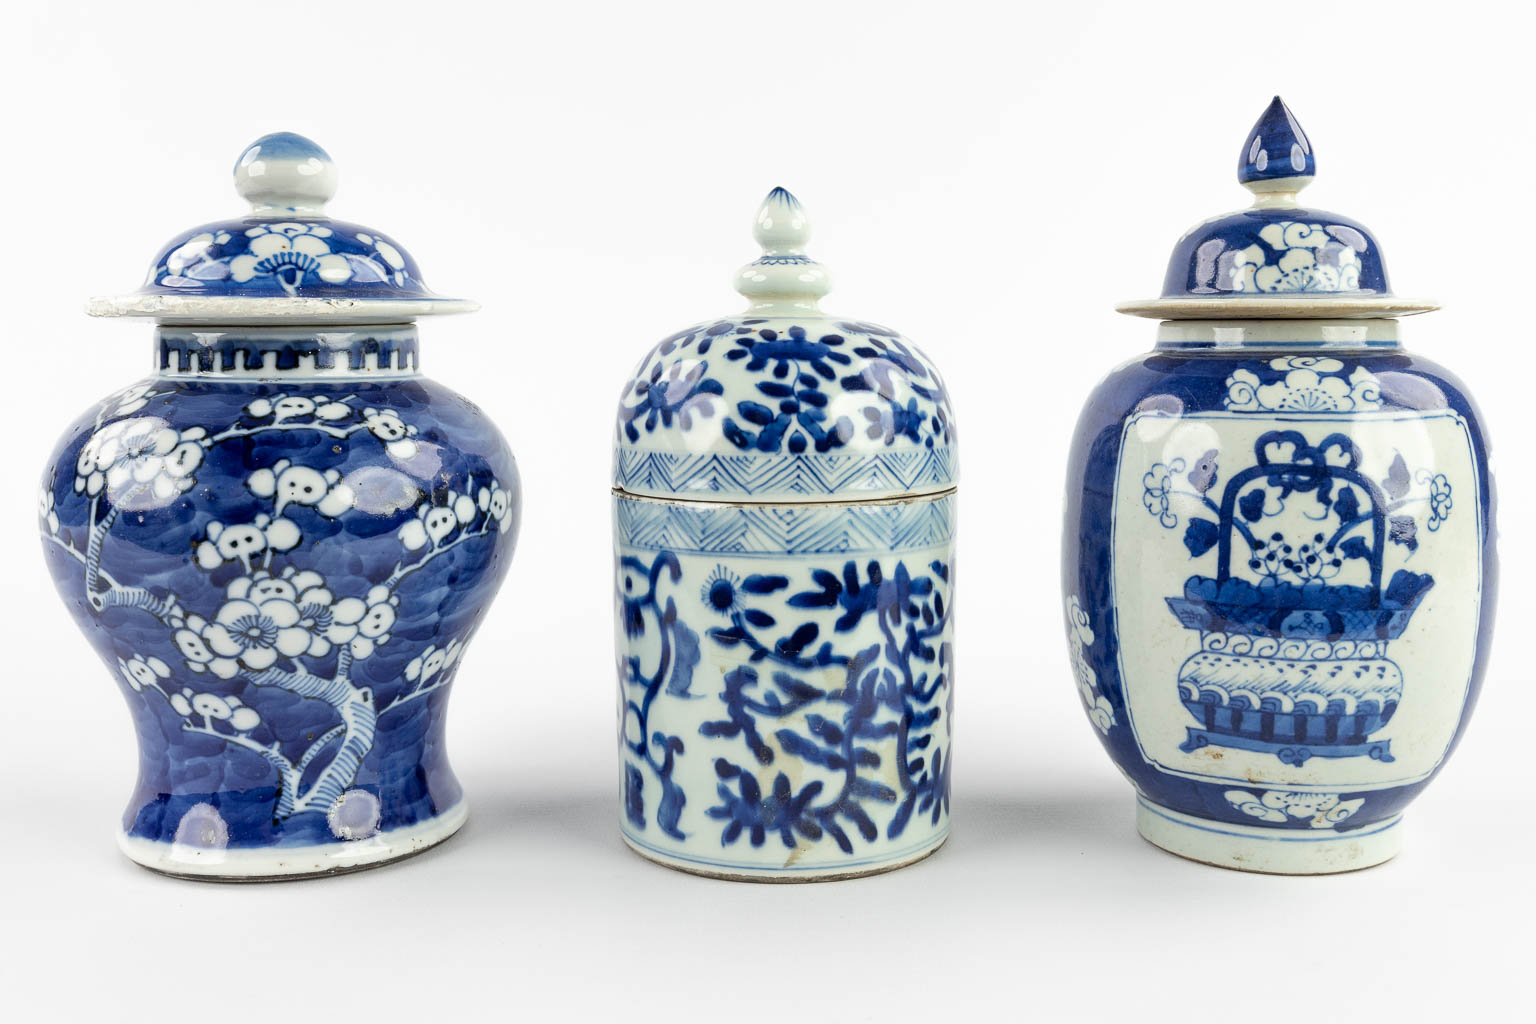 Three pieces of Chinese blue-white porcelain. 20th C. (H:21 x D:13 cm)